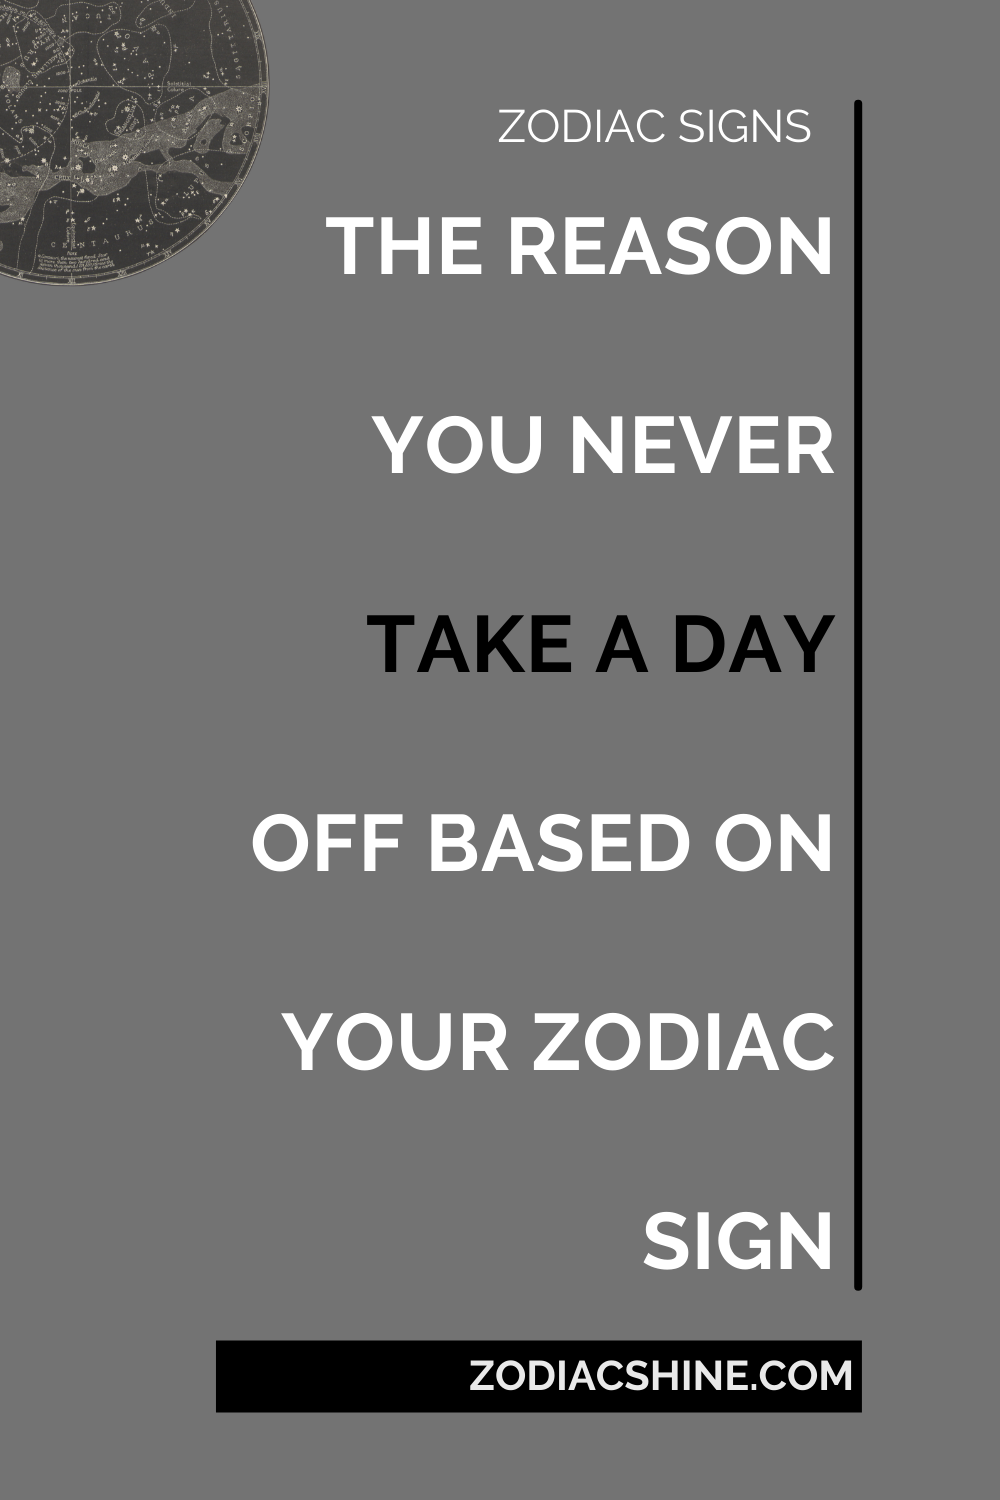 THE REASON YOU NEVER TAKE A DAY OFF BASED ON YOUR ZODIAC SIGN